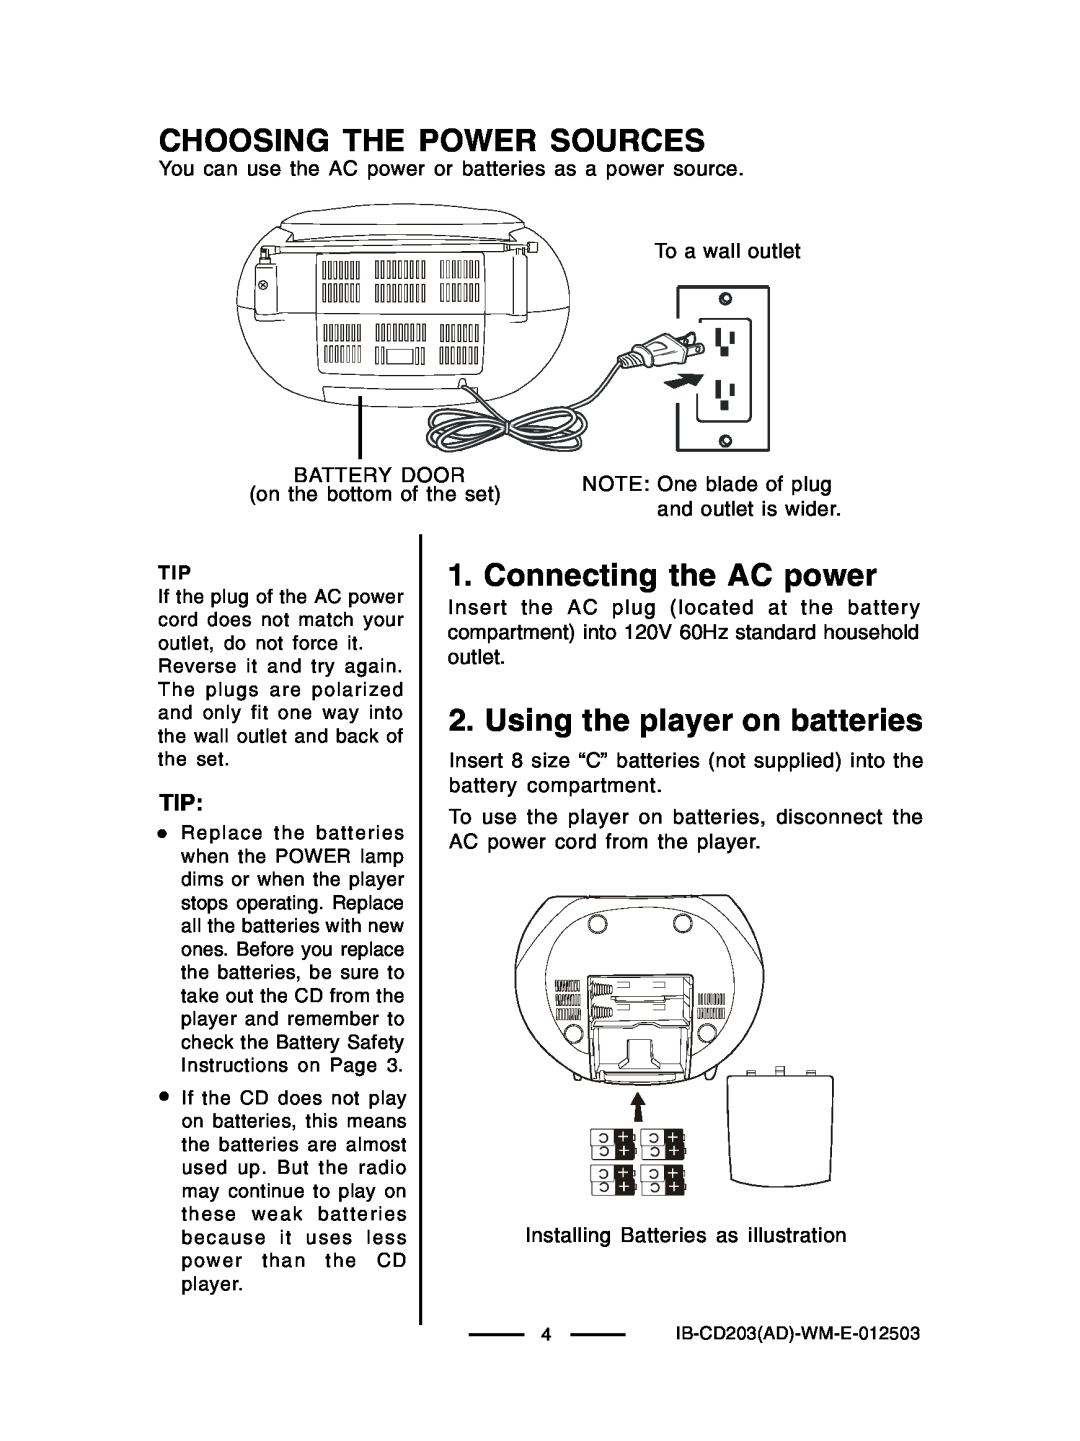 Lenoxx Electronics CD203 manual Choosing The Power Sources, Connecting the AC power, Using the player on batteries 